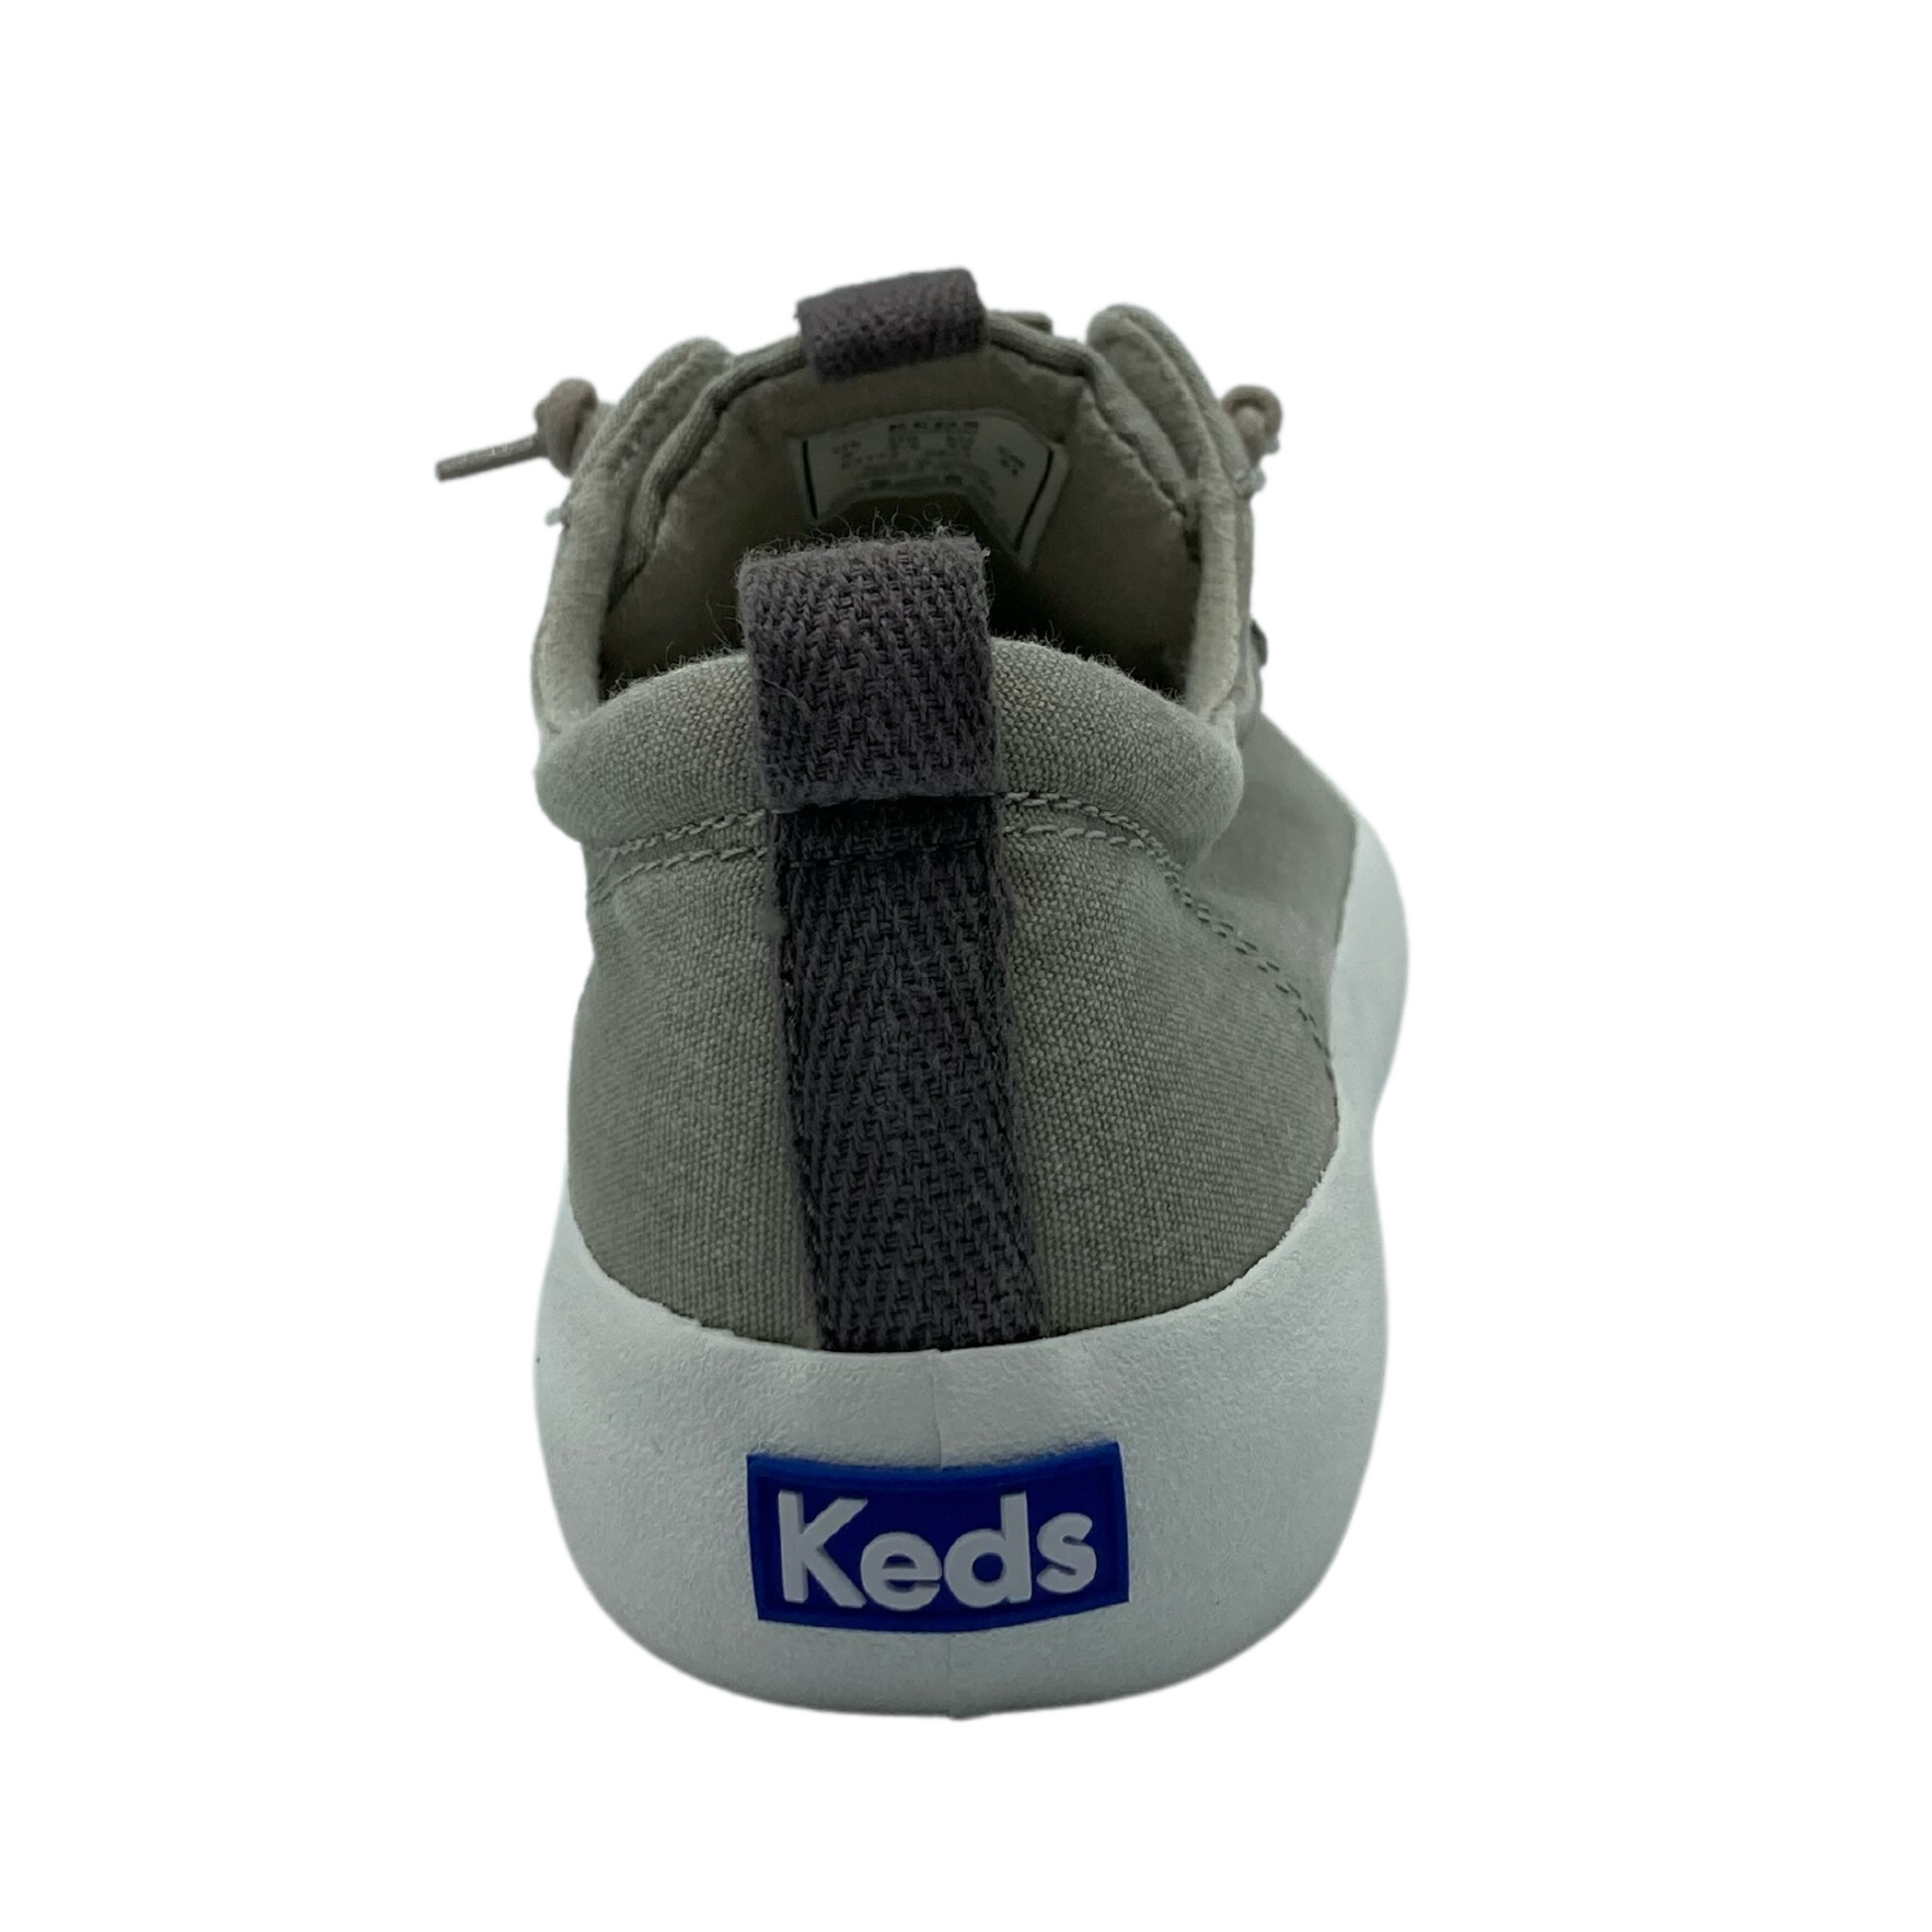 Heel view of shoe with white rubber sole and blue and white Keds logo. Dark grey pull on tab from the top of the sole to top of the ankle